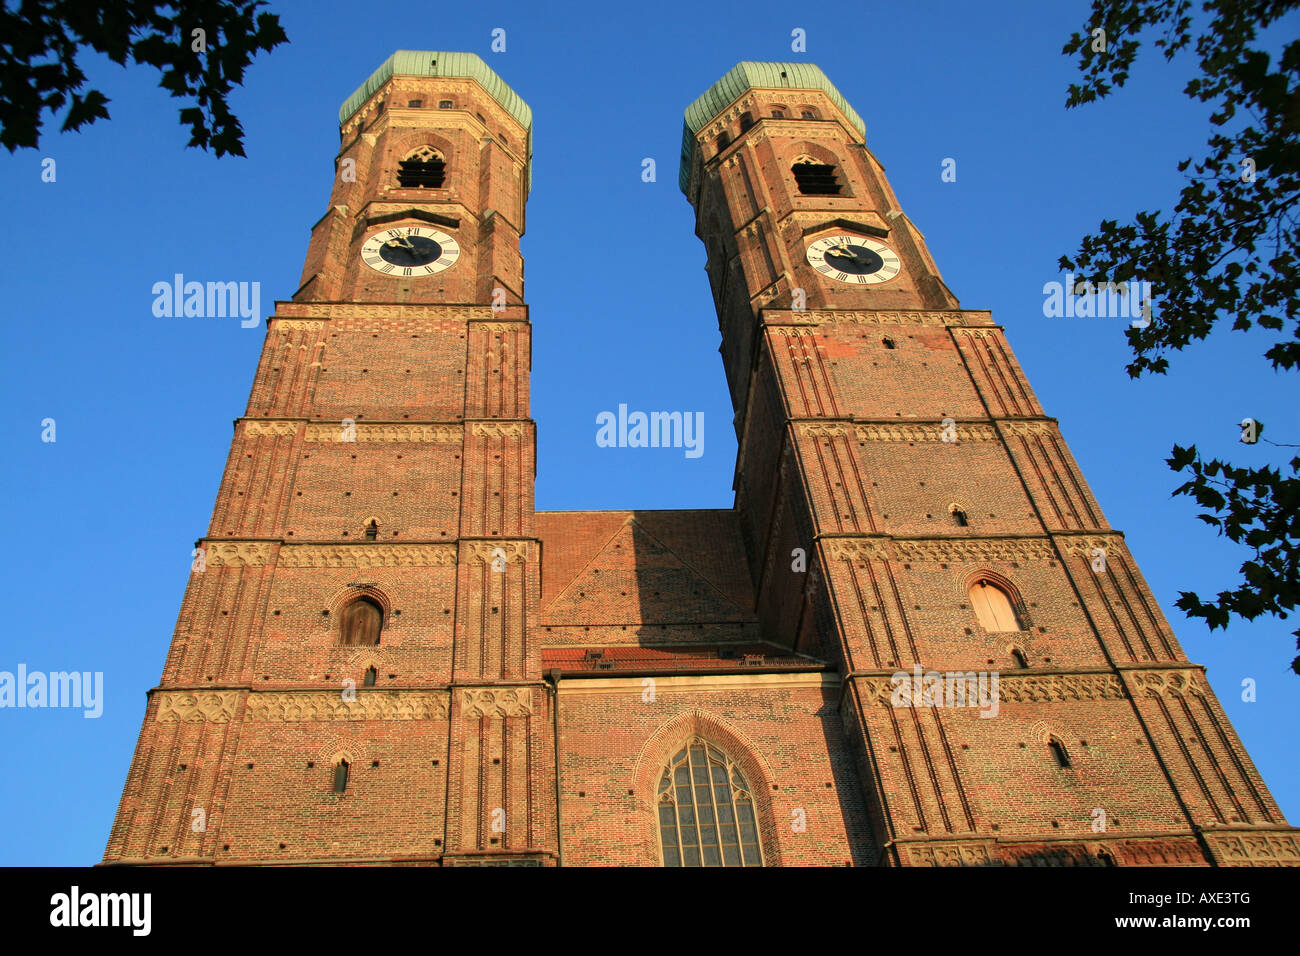 The Frauenkirche (Church of Our Lady), Munich, Germany. Stock Photo